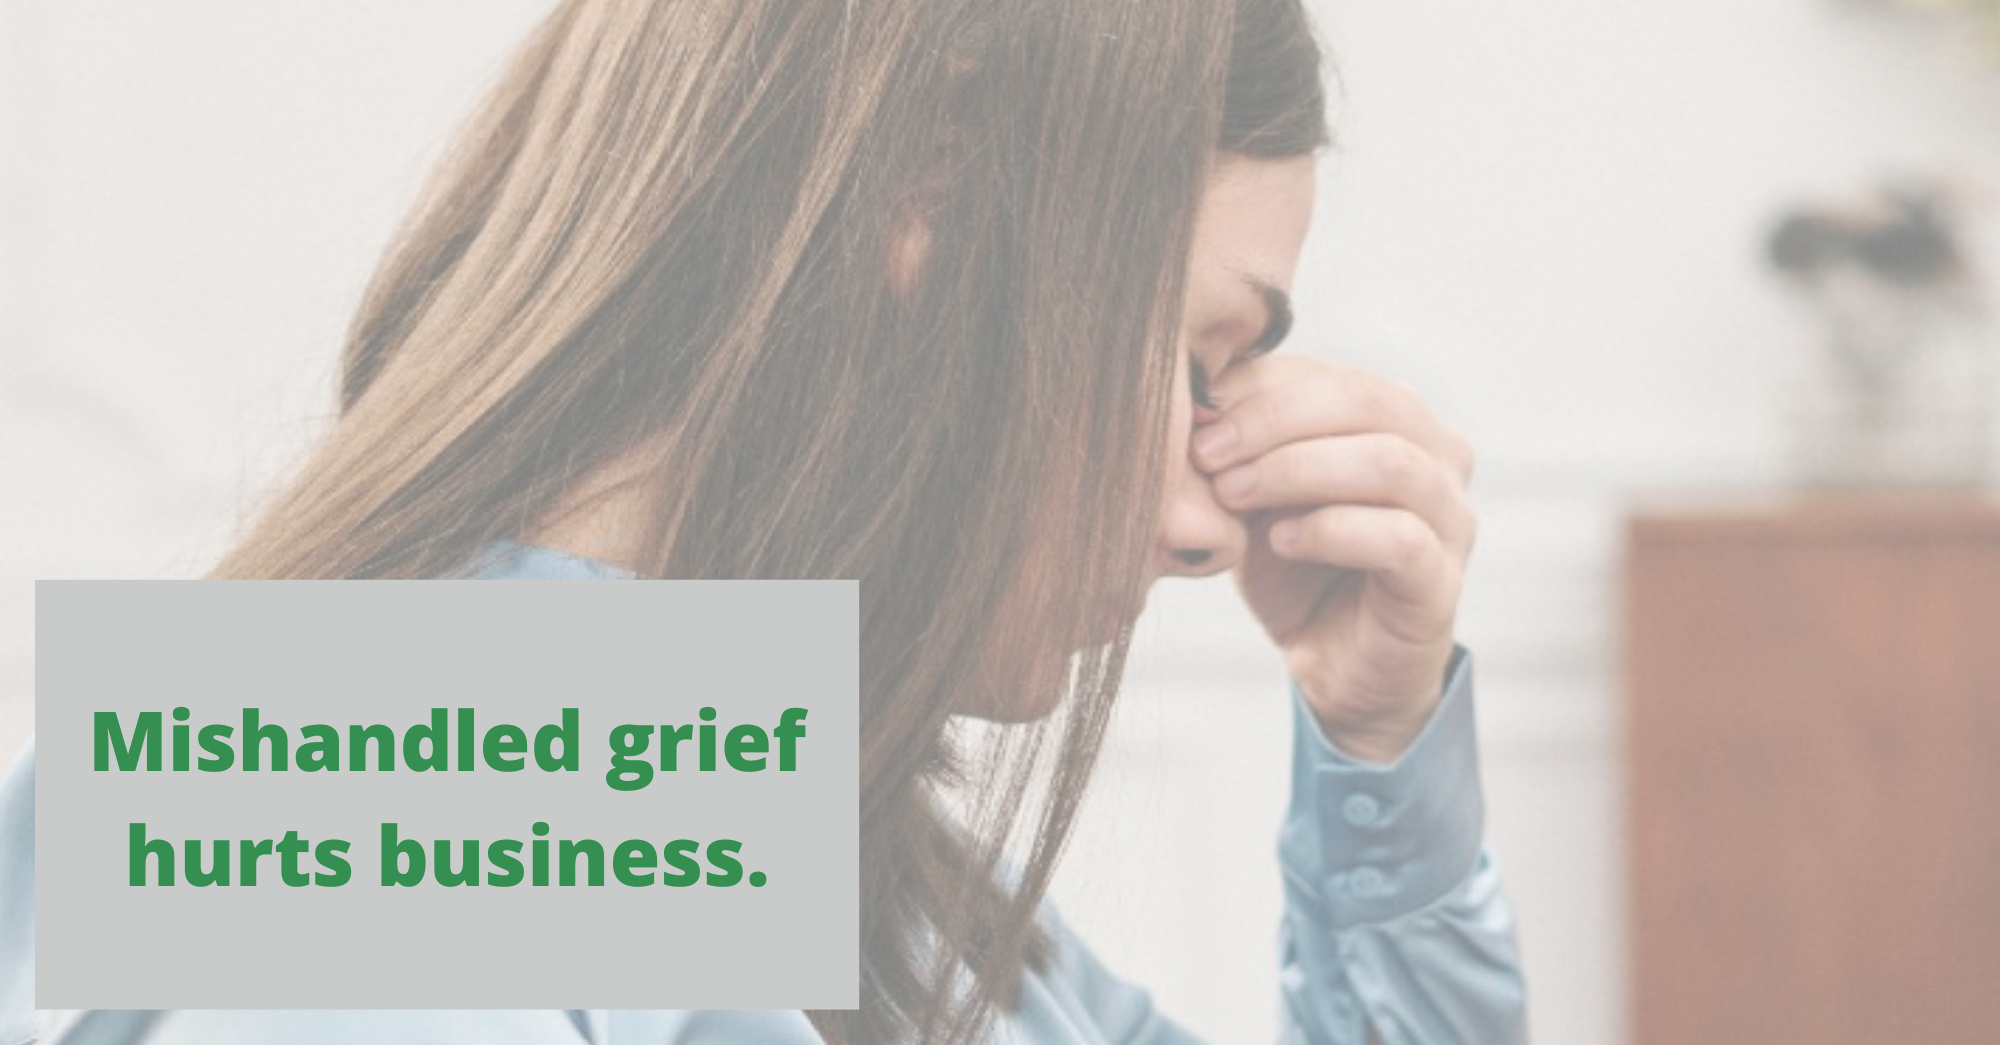 leading through grief, mishandled grief, challenging life disruptions